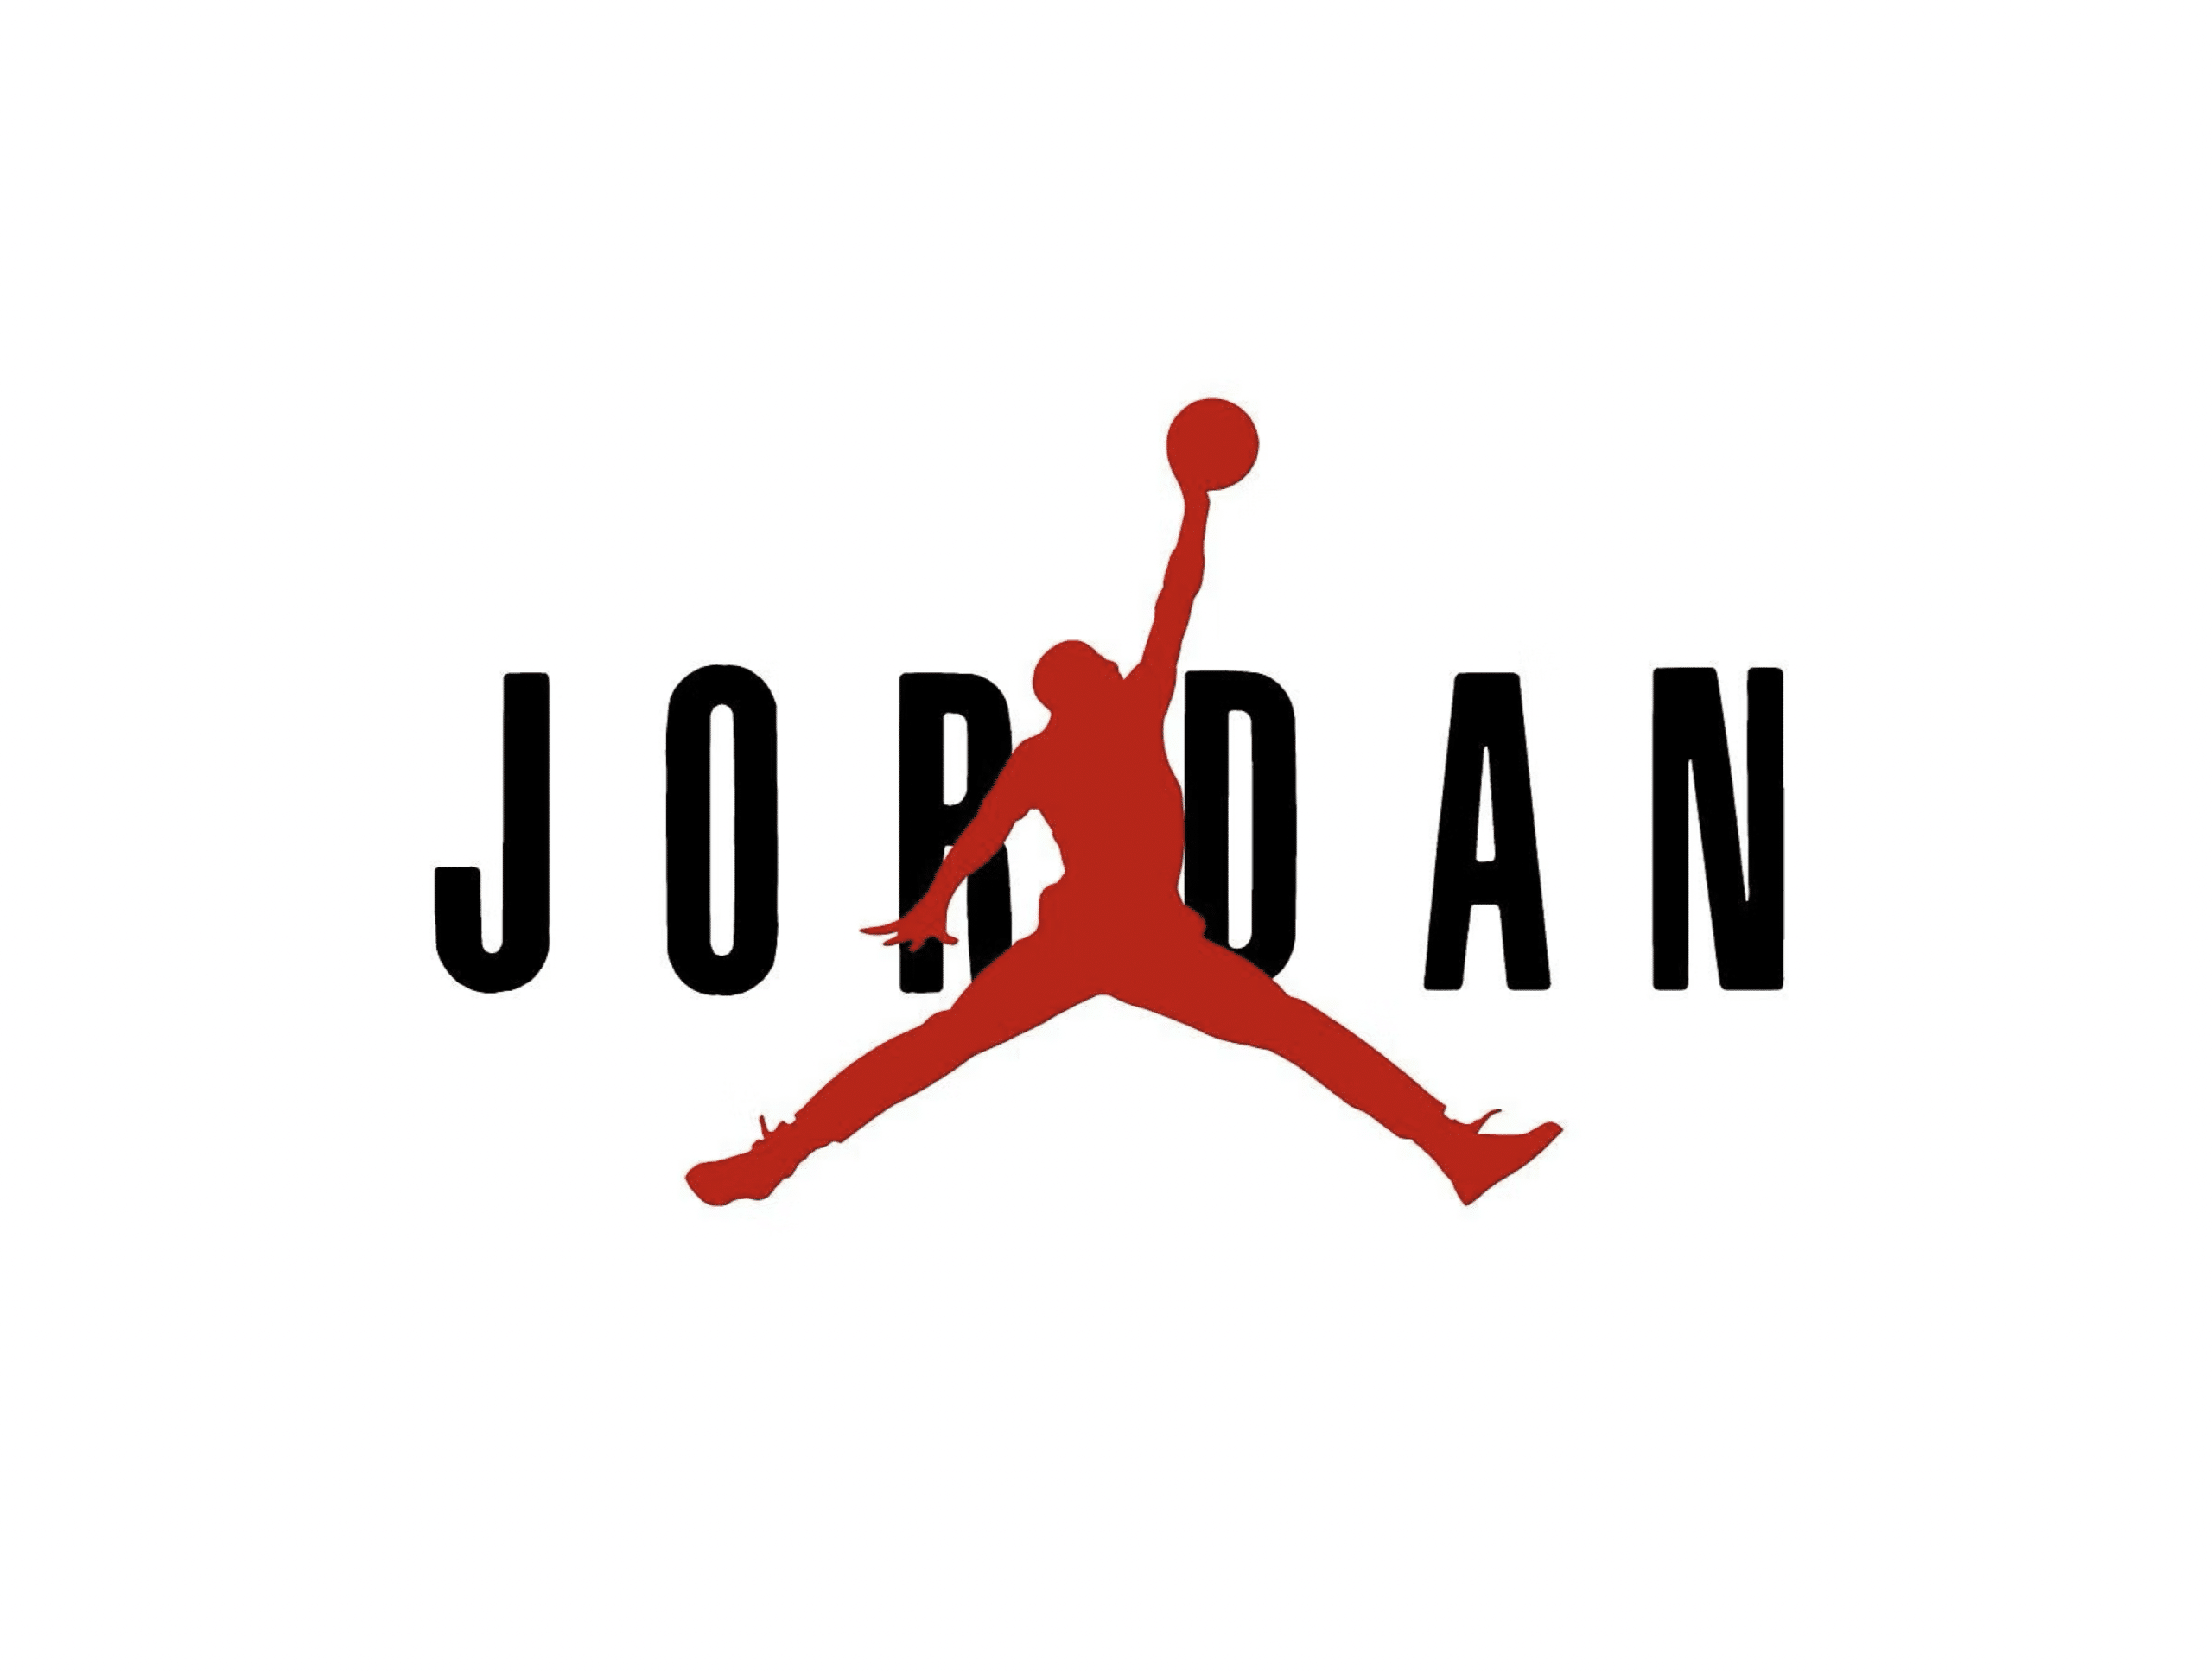 The untold story of the shoe wars: Michael Jordan's influence on design